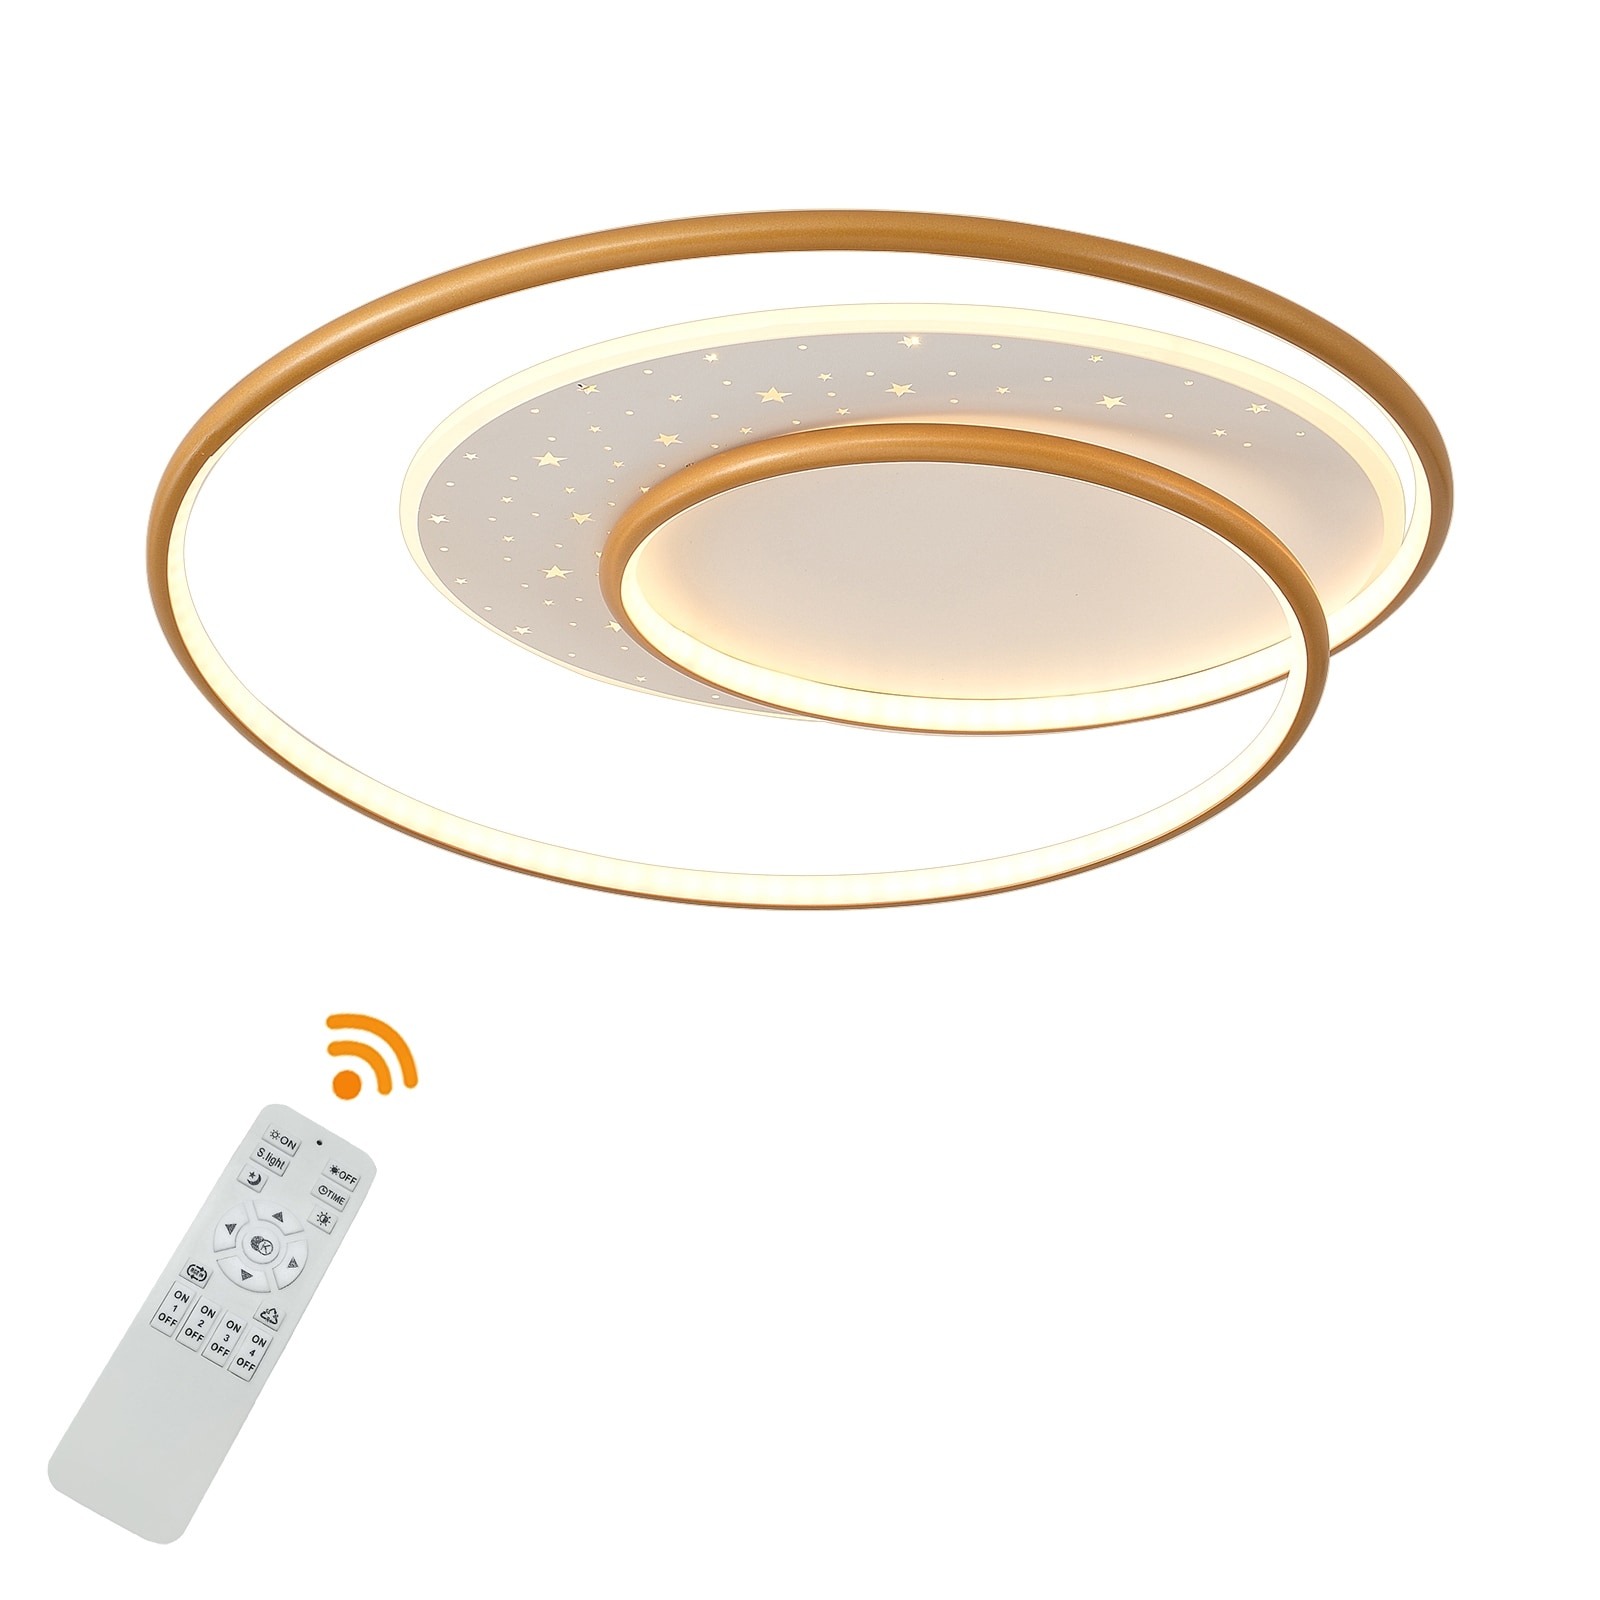 Dimmable LED Flush Mount Ceiling Light Fixture with Remote Control